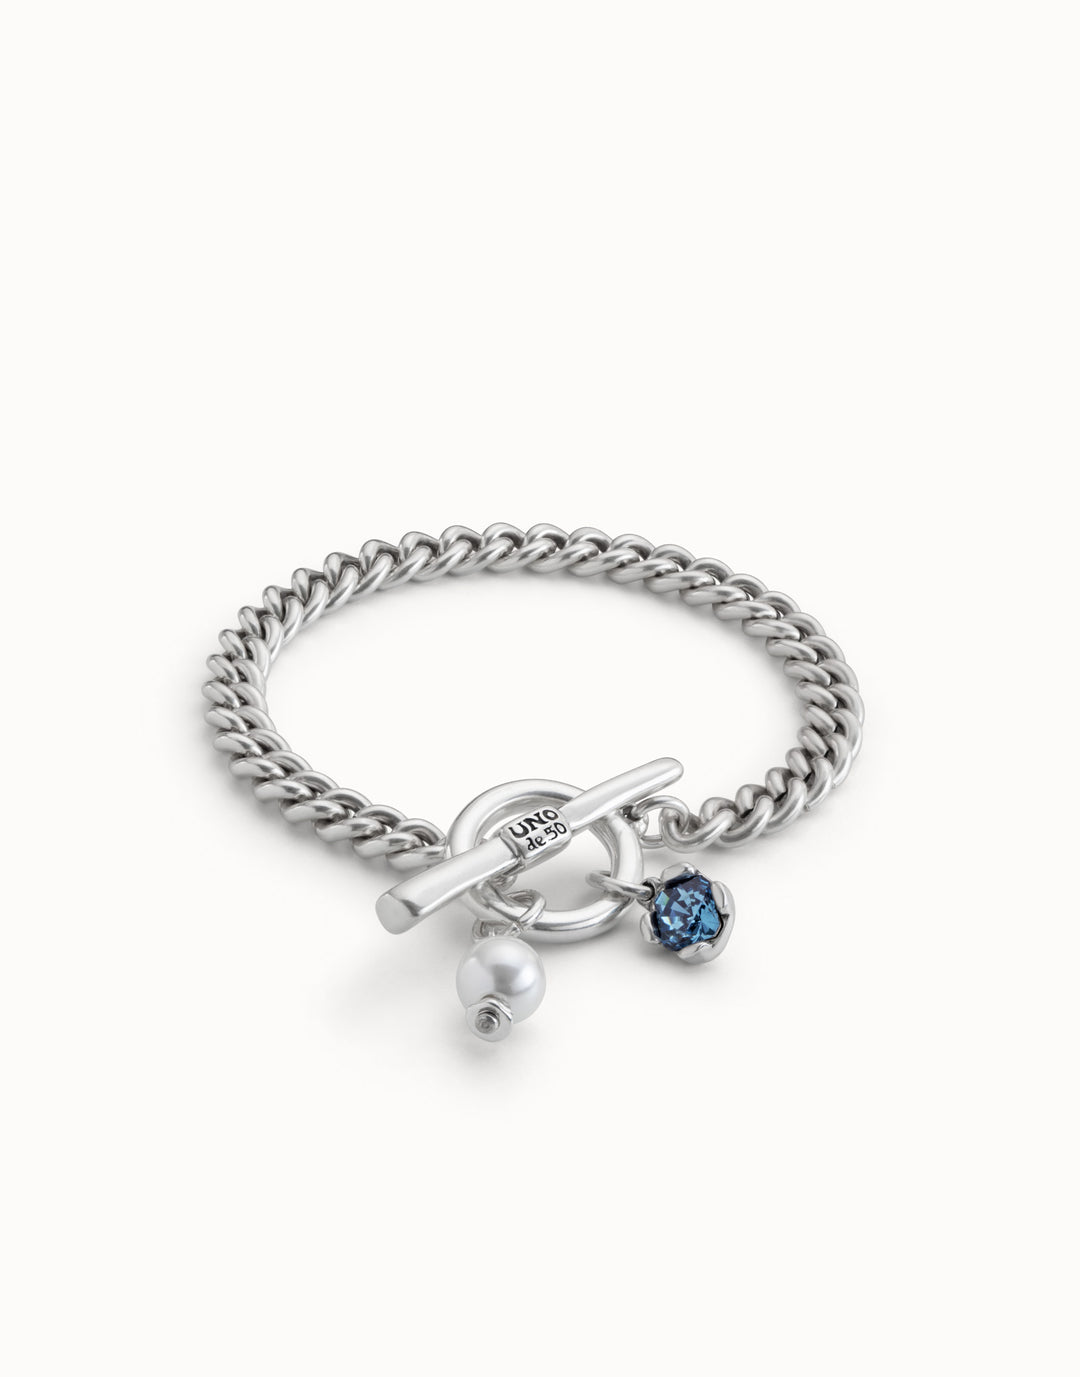 TWO EXPEARLTIONAL BRACELET-SILVER - Kingfisher Road - Online Boutique